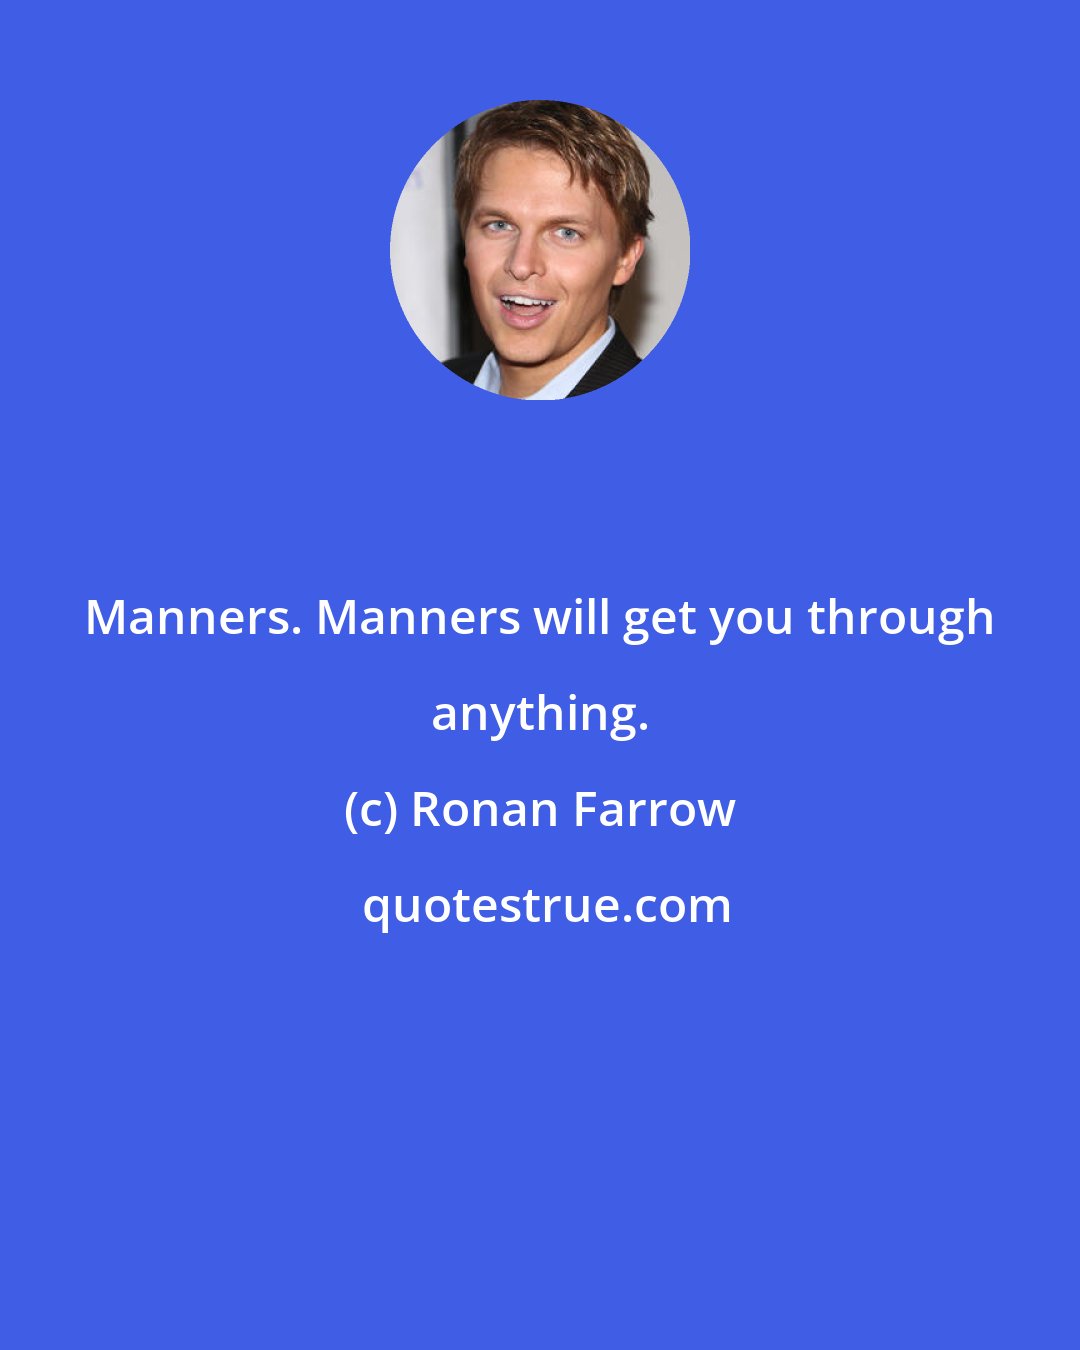 Ronan Farrow: Manners. Manners will get you through anything.